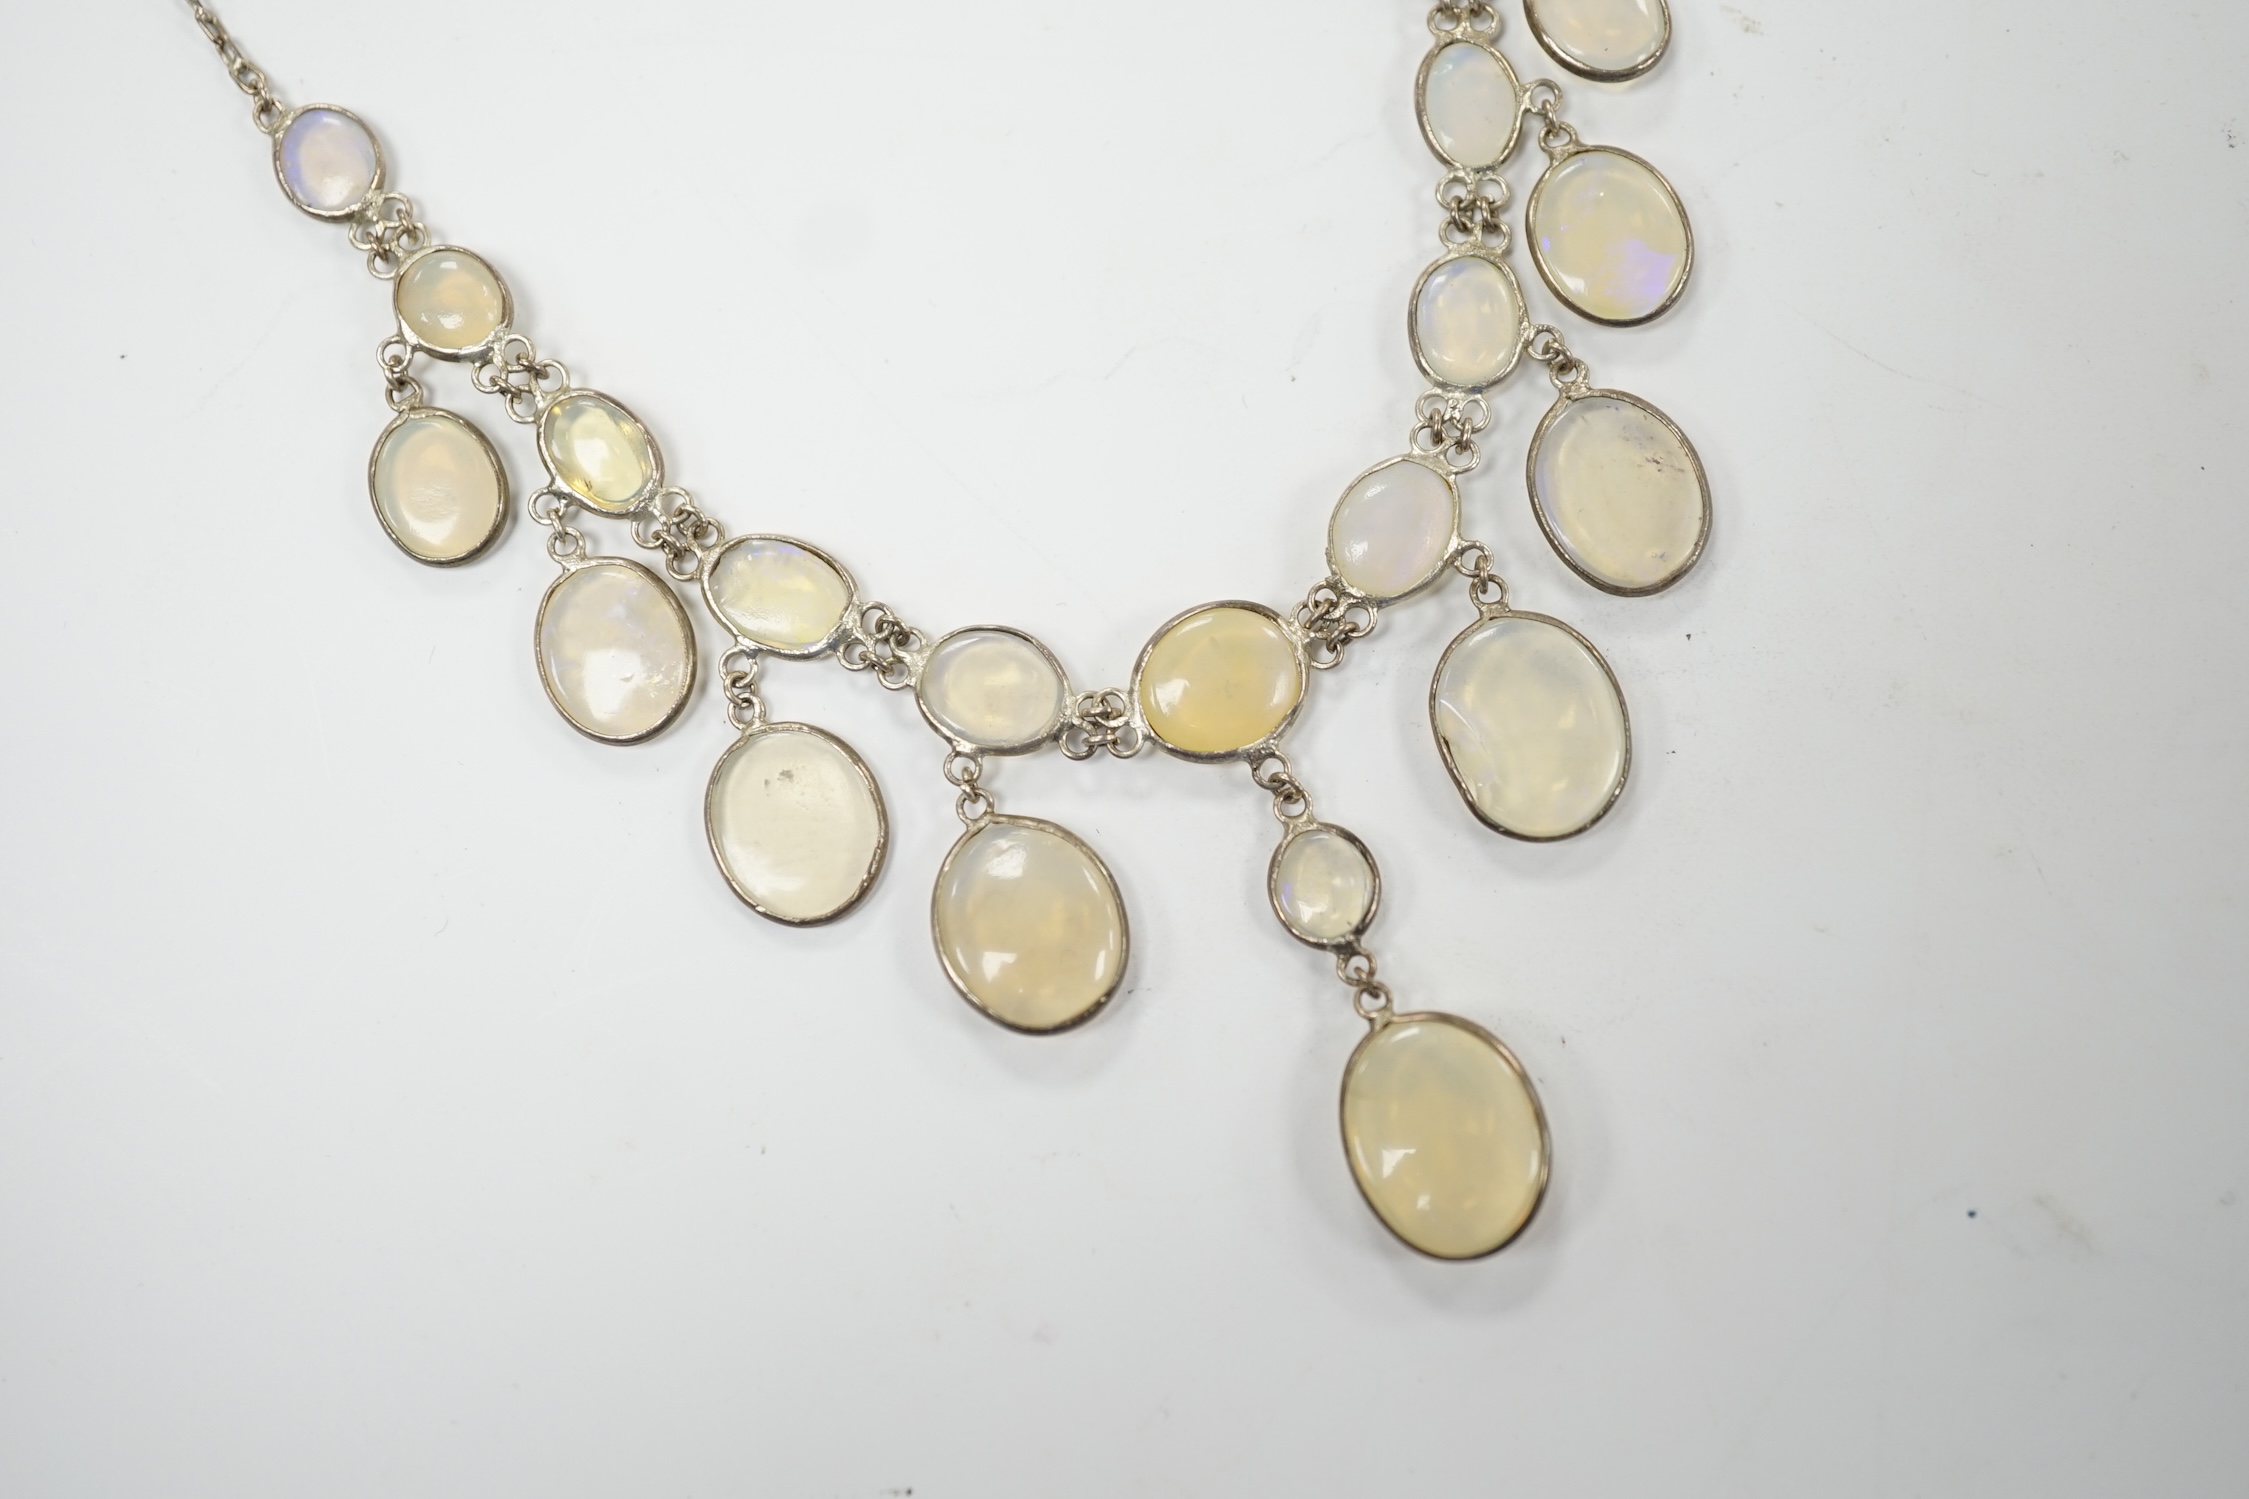 A white metal and graduated cabochon moonstone set drop necklace, 46cm. Condition - fair, one stone chipped